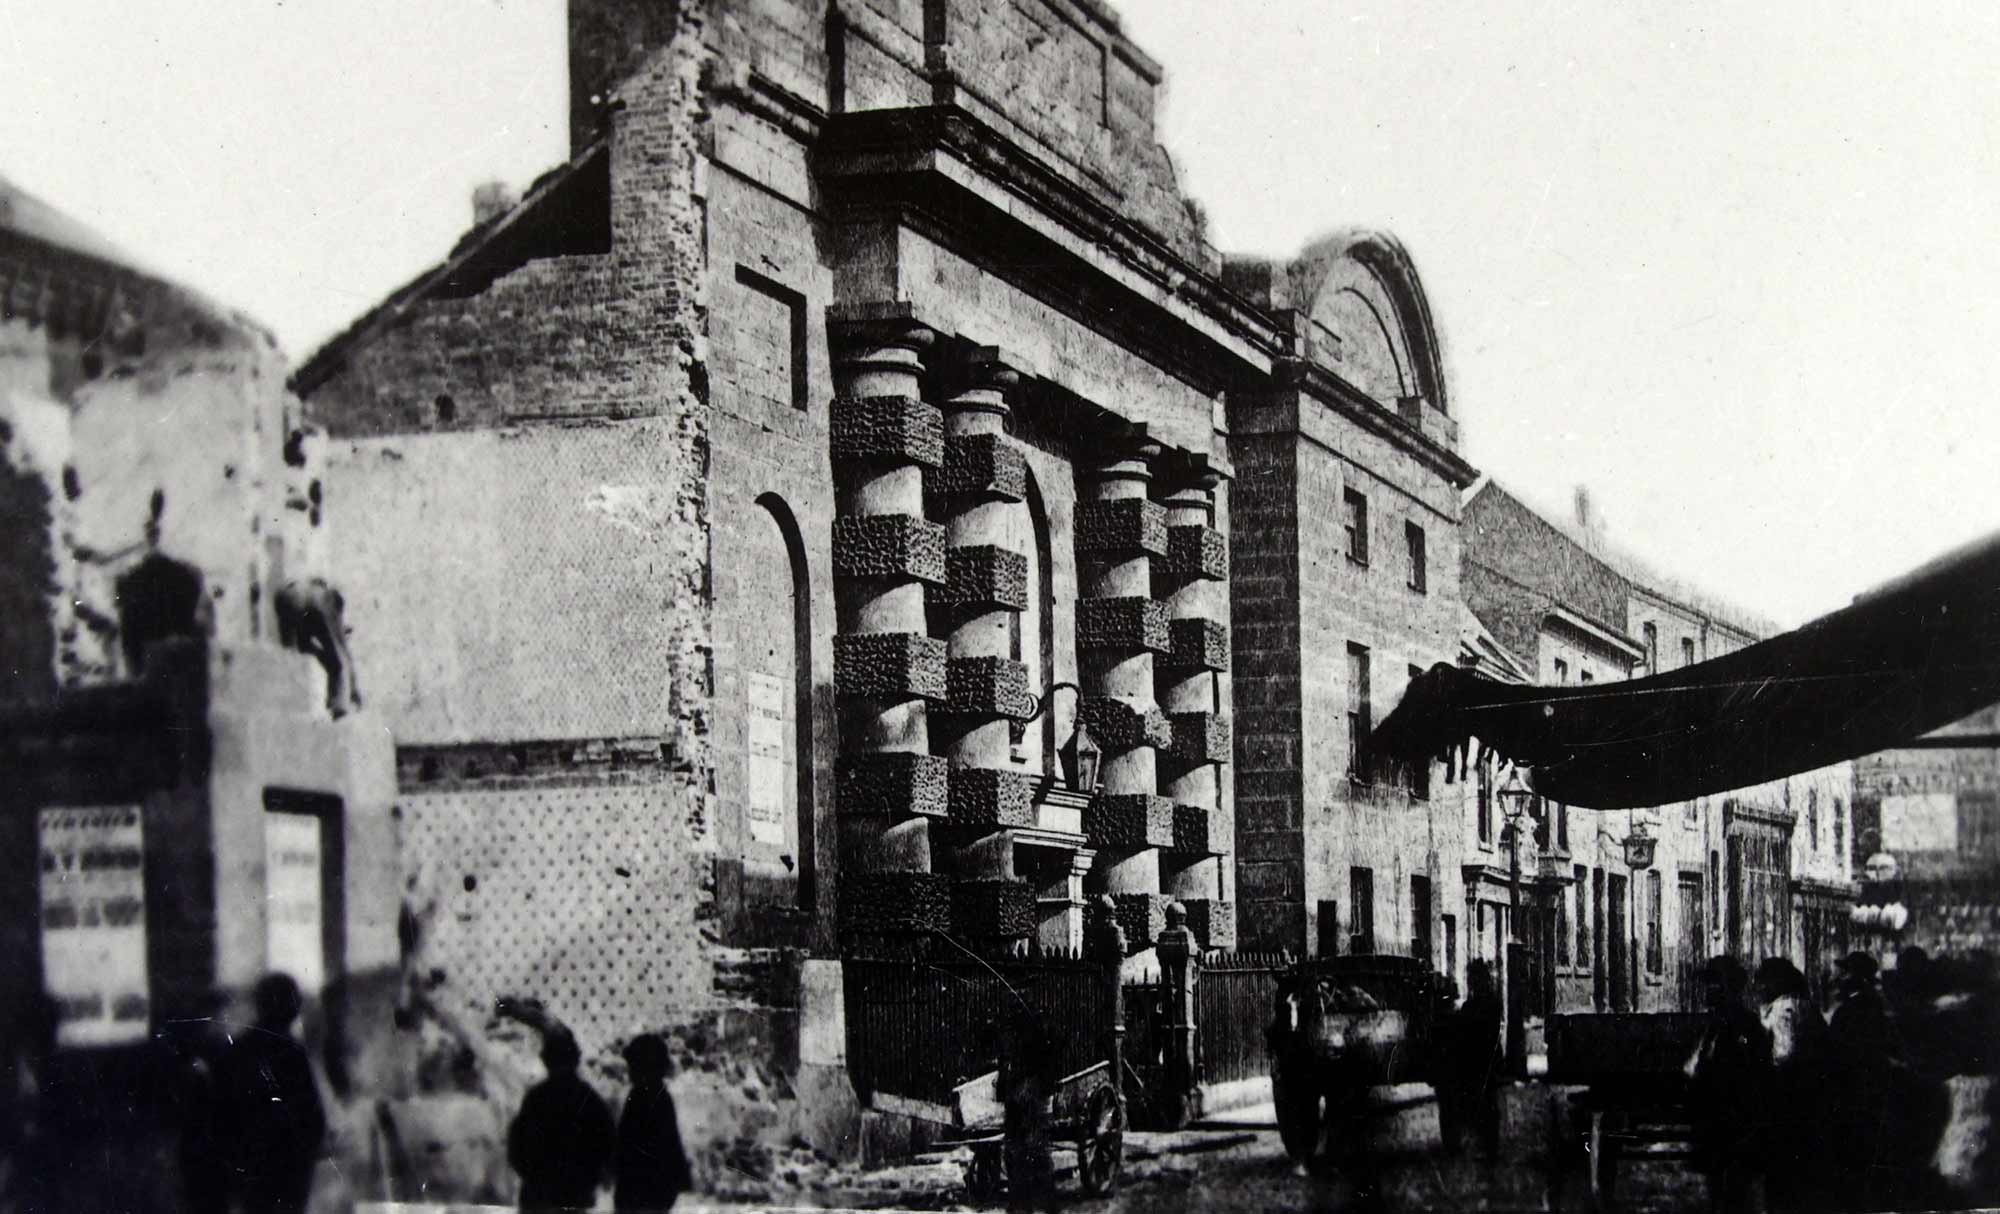 A photo of the Borough Gaol being demolished in 1880 - Leicester and Leicestershire Record Office